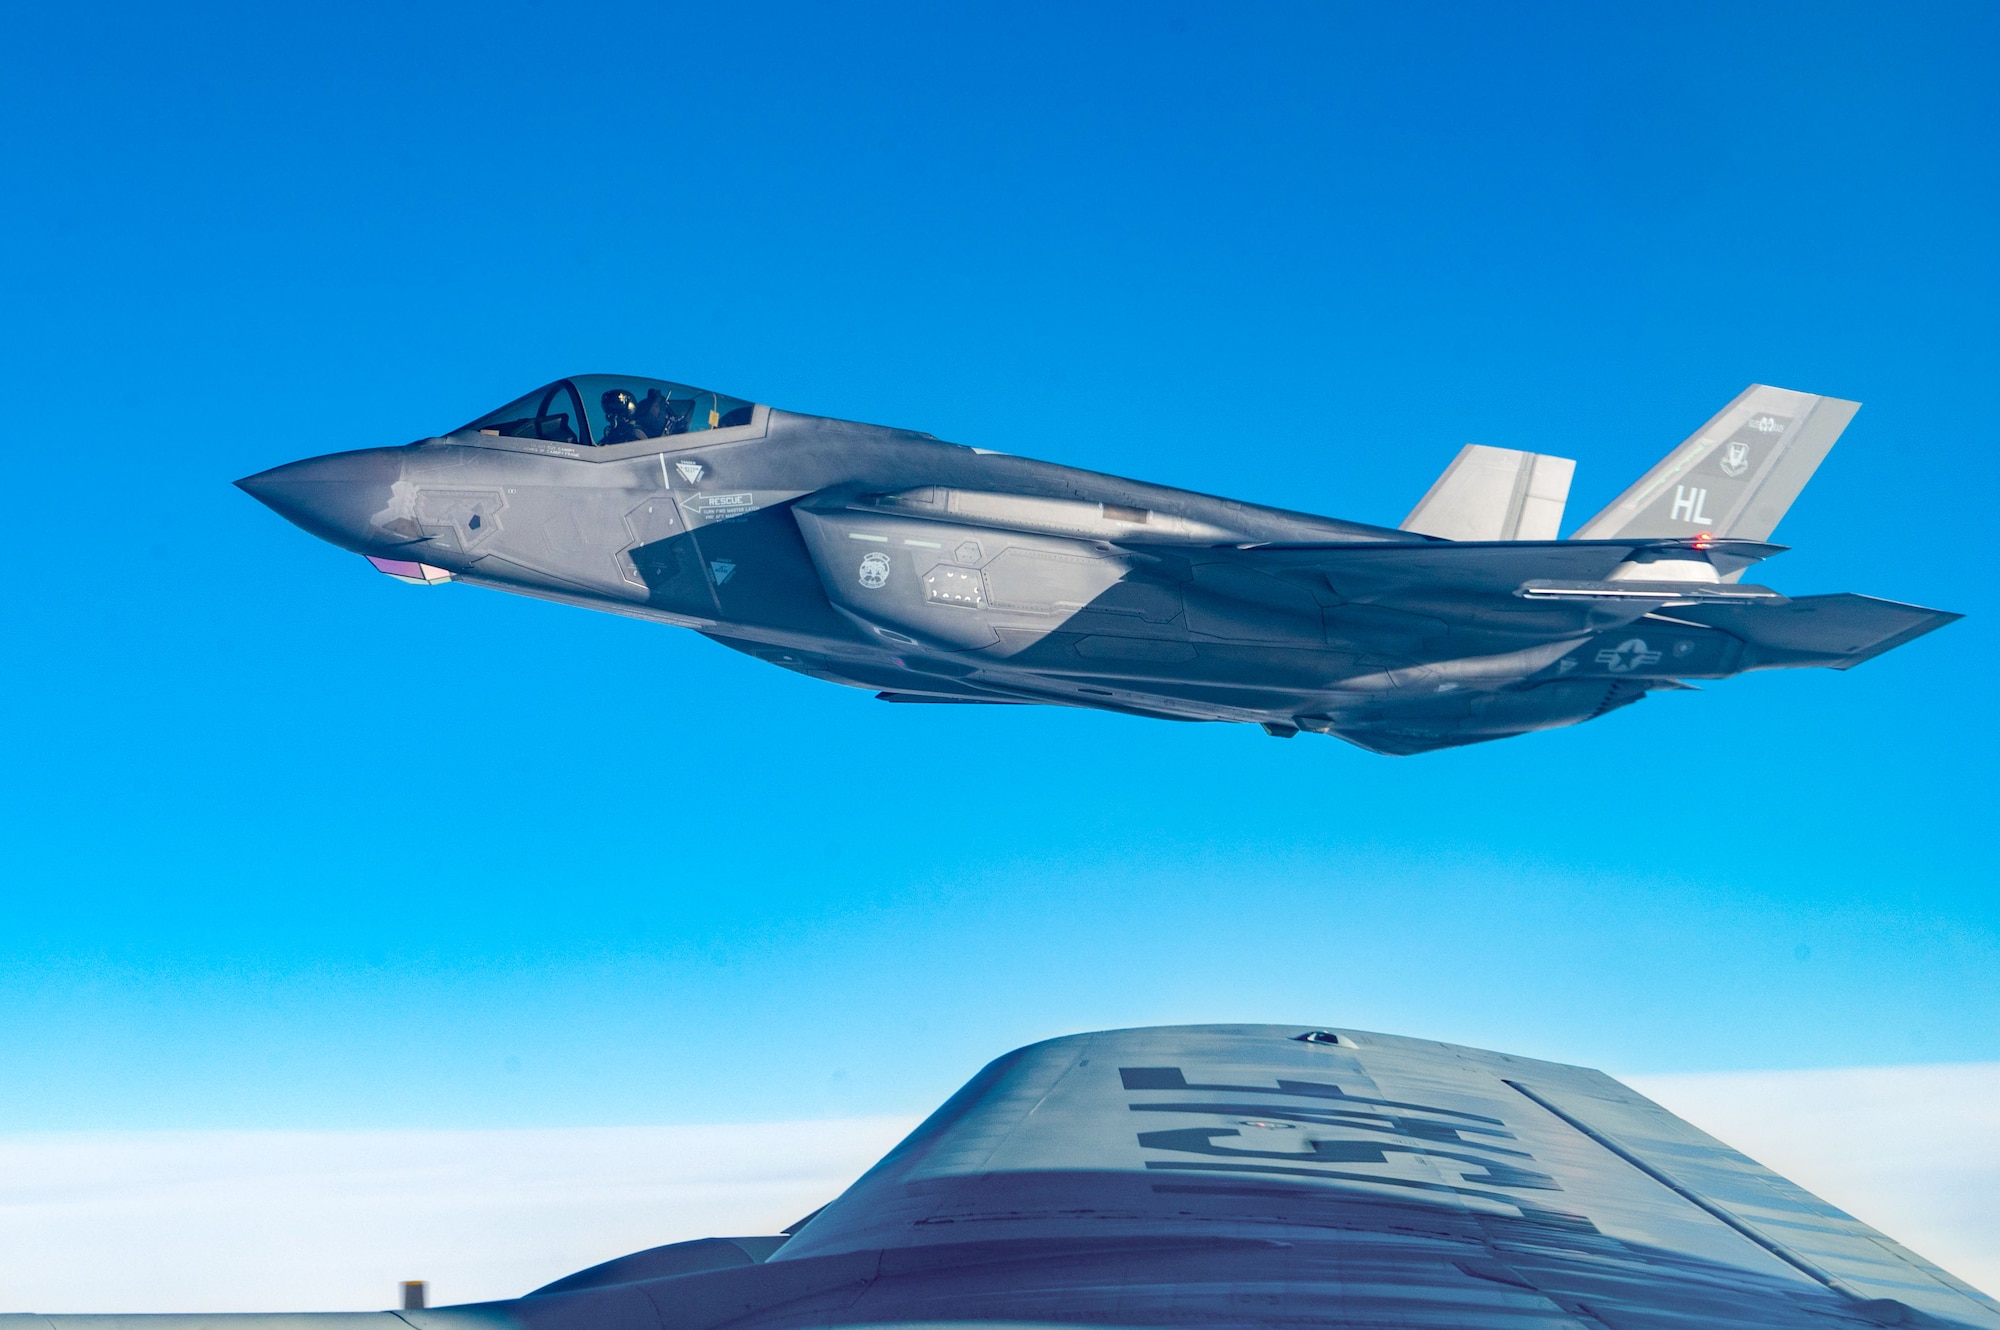 A U.S. Air Force F-35 Lightning II from Hill Air Force Base flies in formation with a KC-135 Stratotanker from Fairchild Air Force Base after being refueled, Dec. 12, 2022. The KC-135 is the core of air refueling, and is responsible for extending the Air Force’s global reach. (U.S. Air Force photo by Airman 1st Class Stassney Davis)